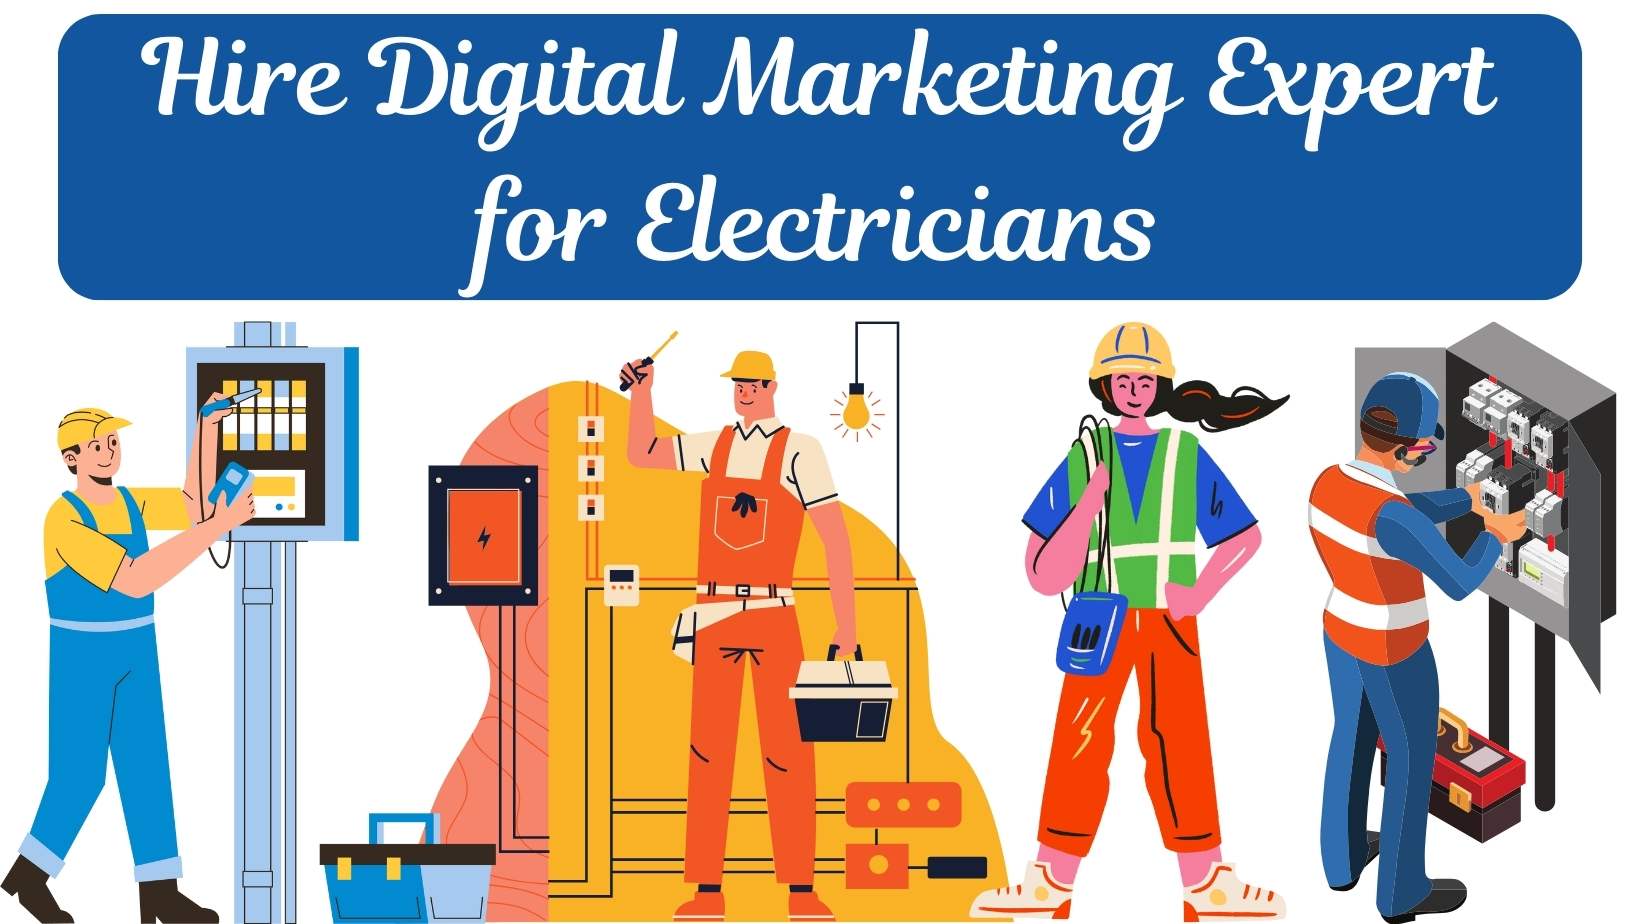 Hire Digital Marketing Expert for Electricians